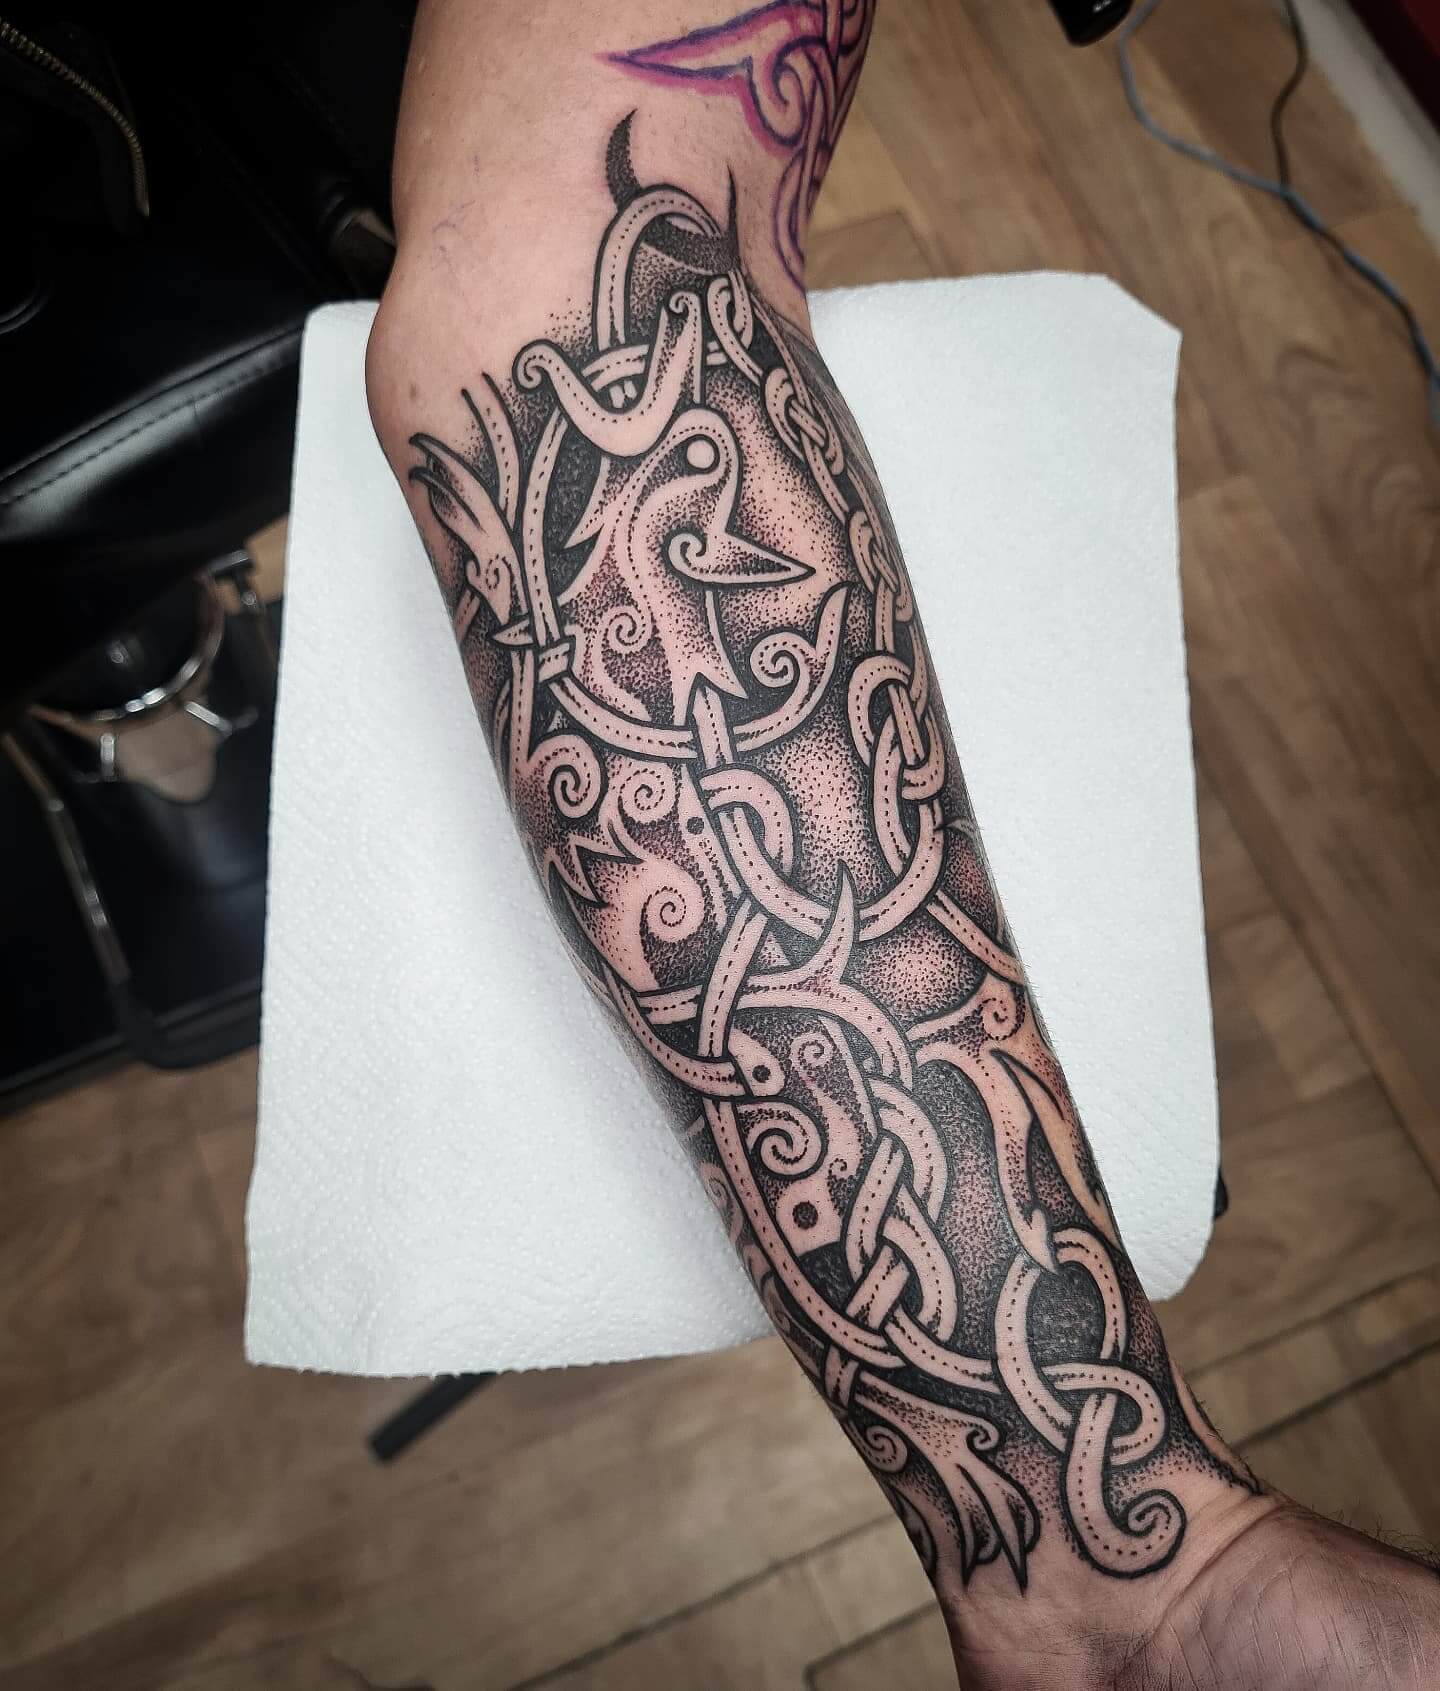 101 Best Celtic Sleeve Tattoo Ideas That Will Blow Your Mind!